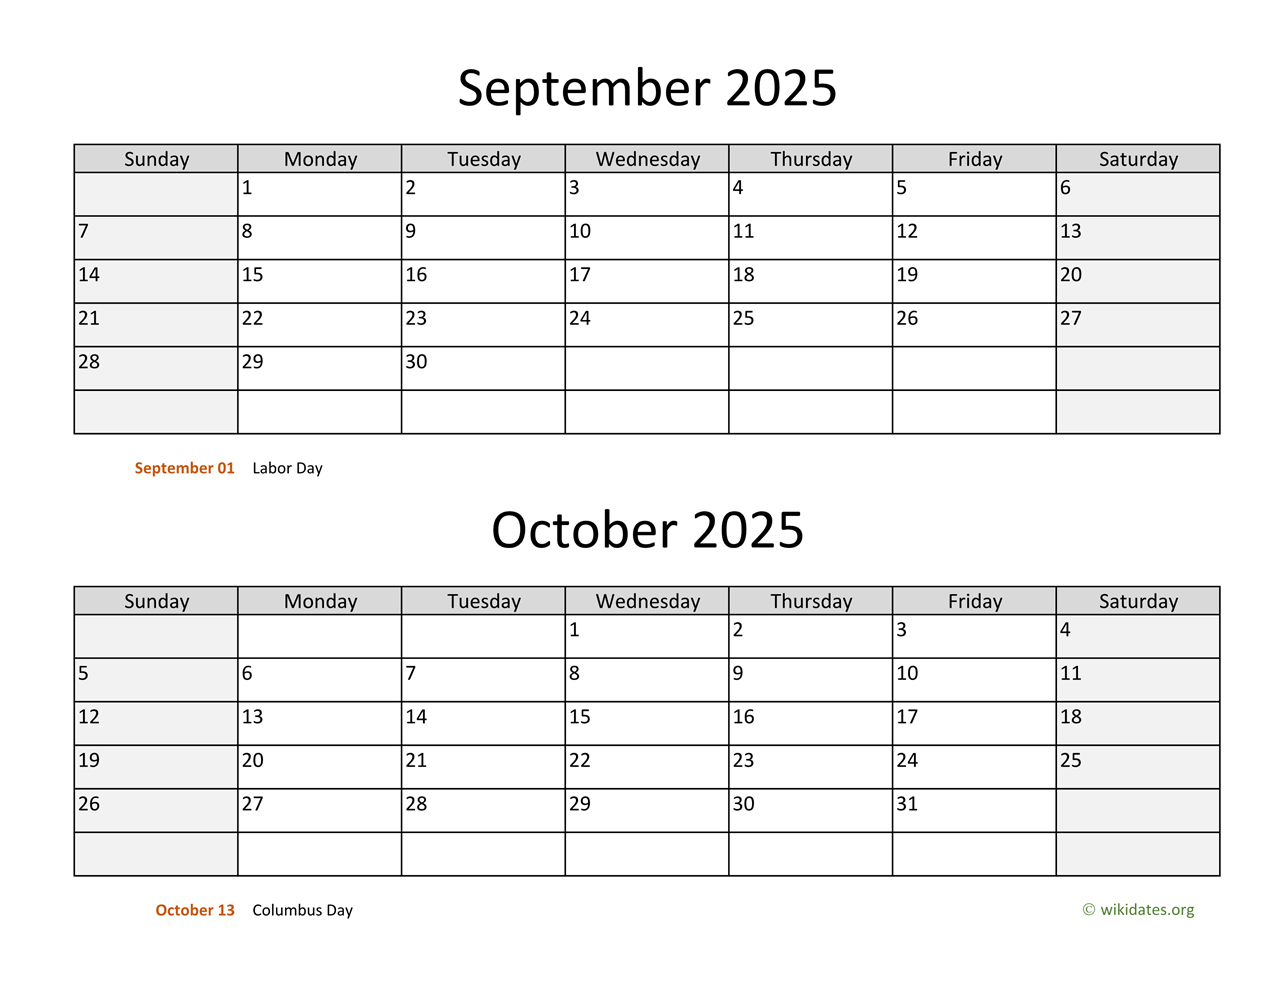 october-2025-calendar-with-extra-large-dates-wikidates